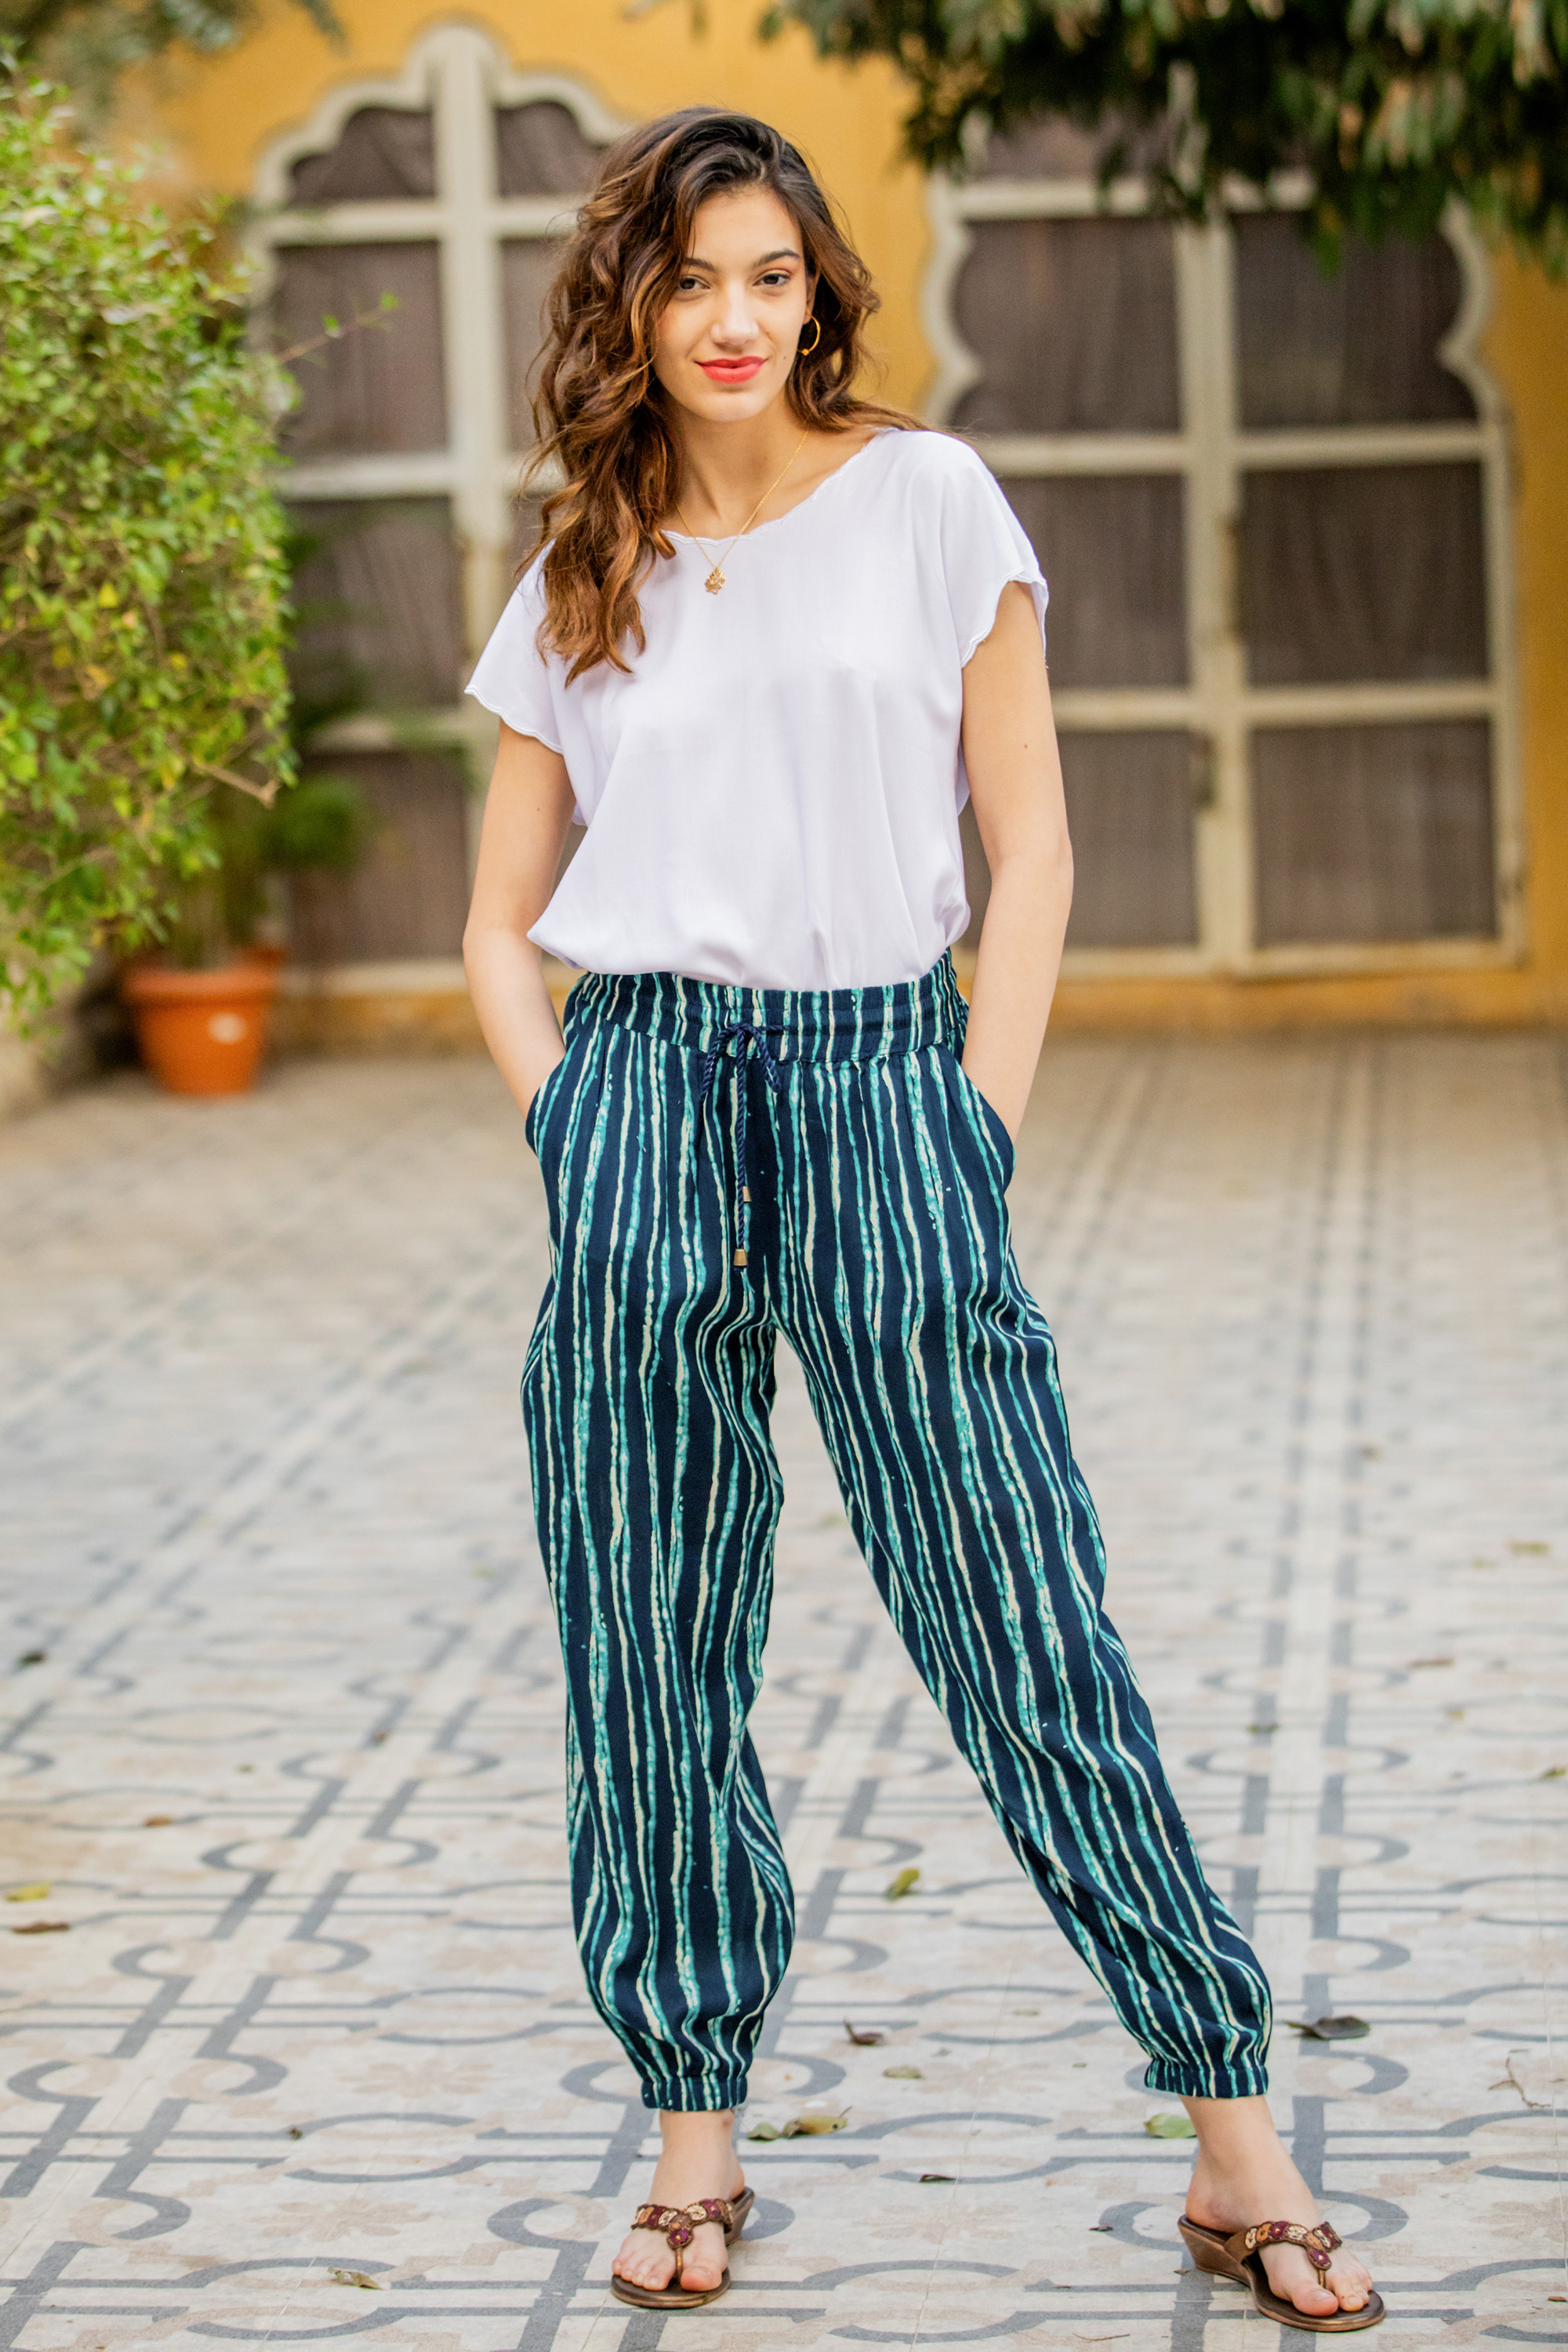 Striped Tie-Dye Viscose Pants from India - Breezy Stripes